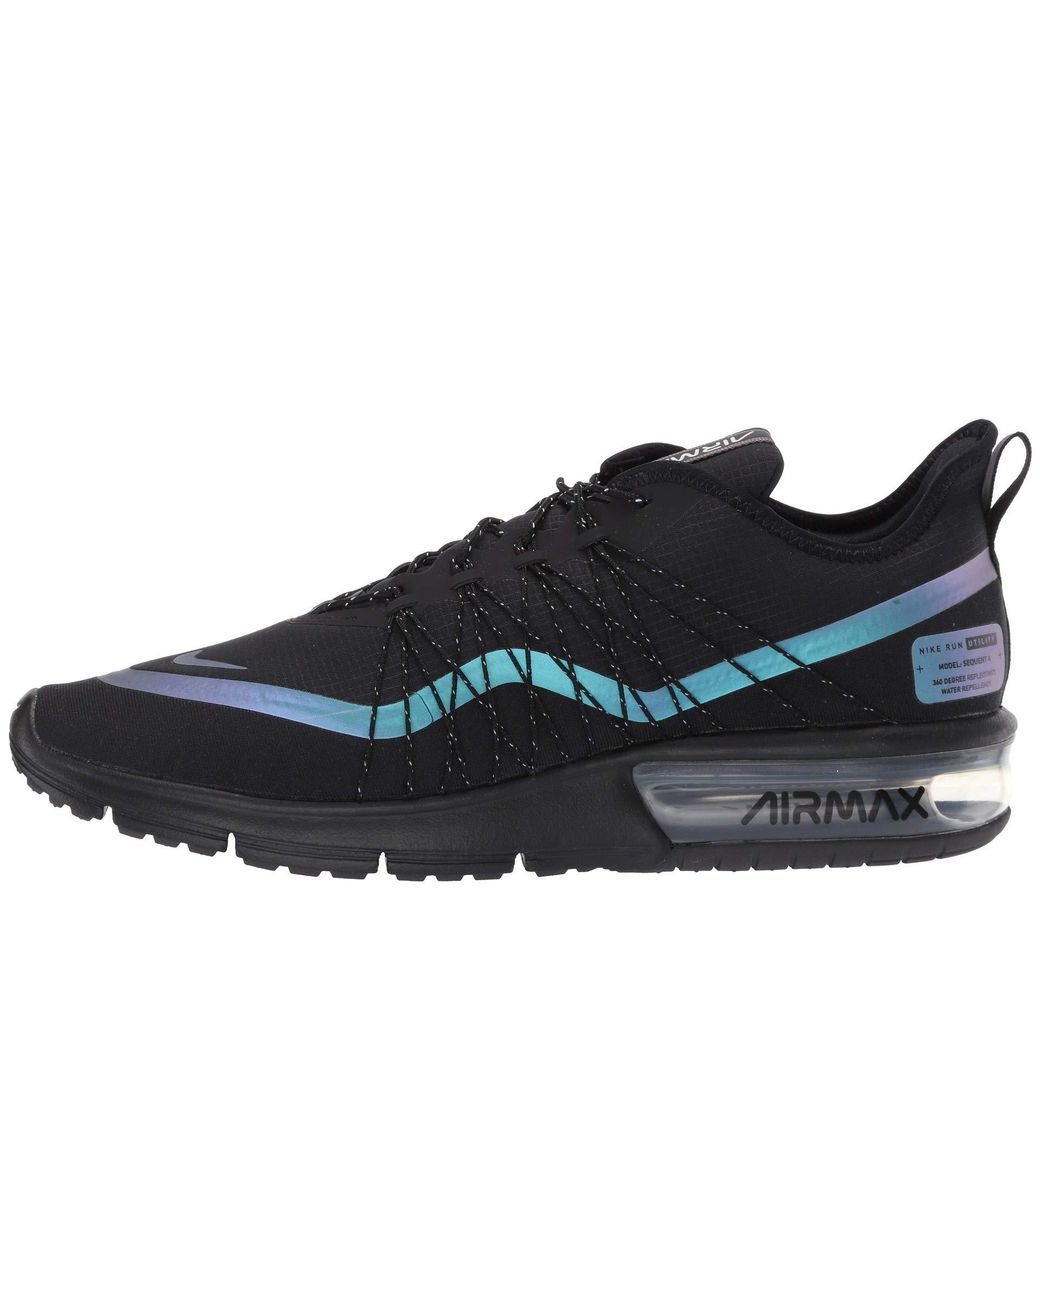 Nike Men's Black Air Max Sequent 4 Utility Running Shoes